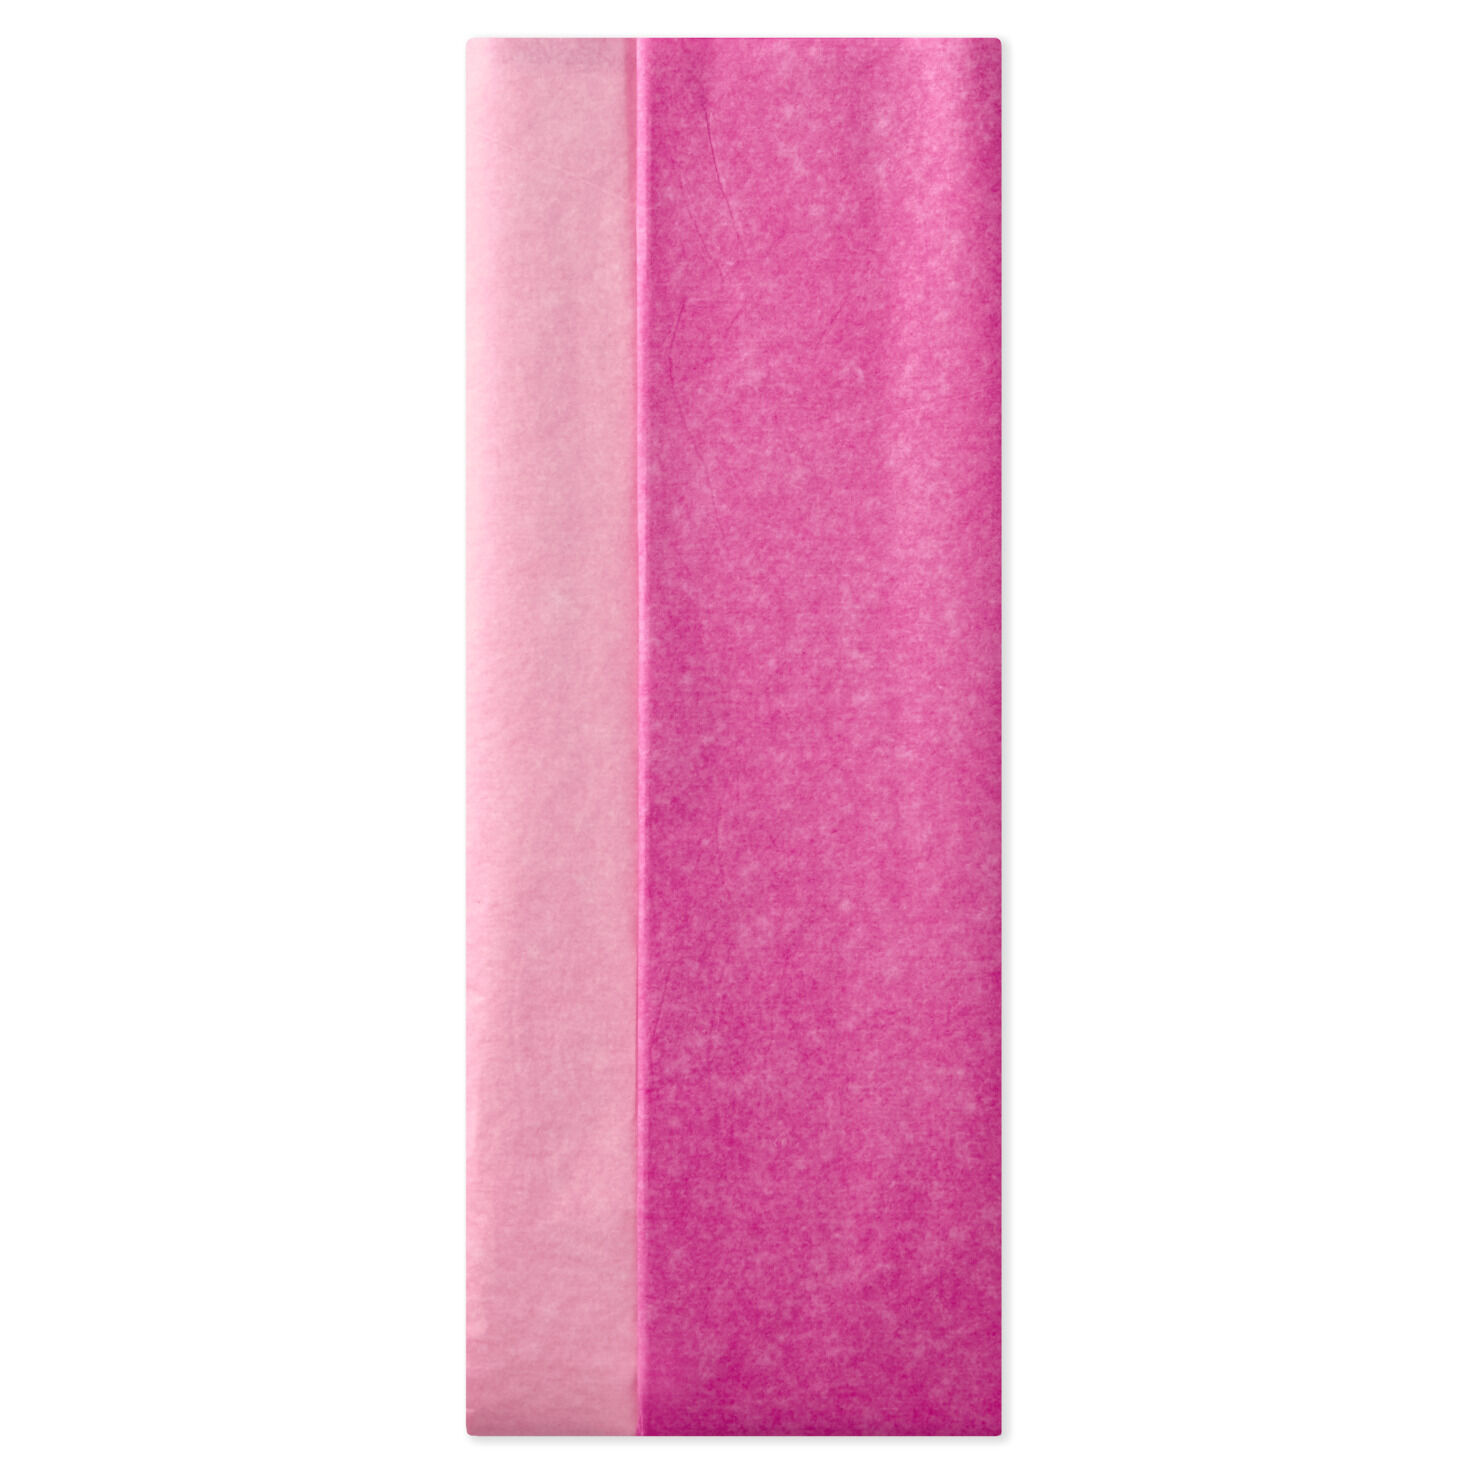 Light Pink and Dark Pink 2-Pack Tissue Paper, 6 Sheets - Tissue